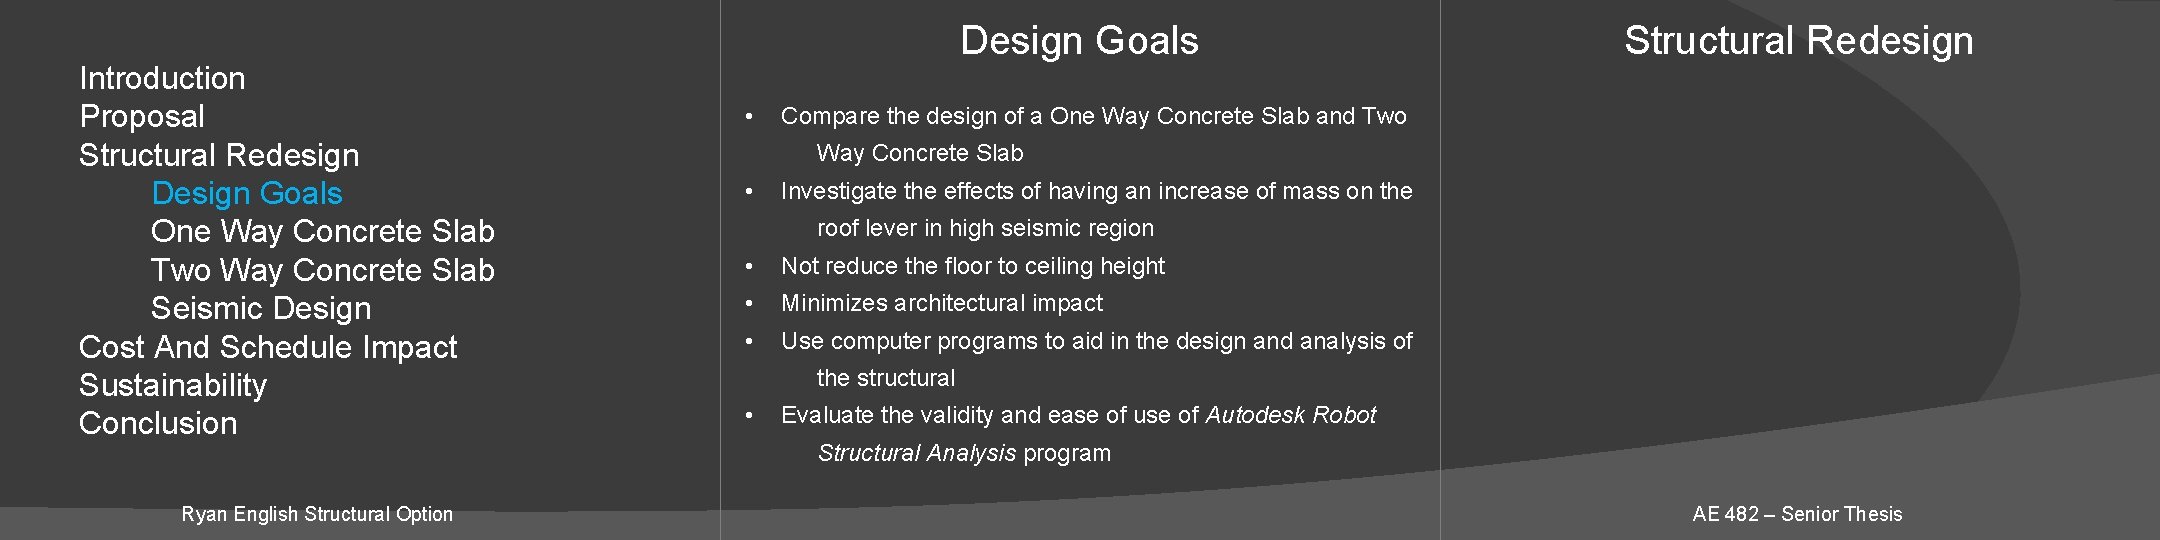 Introduction Proposal Structural Redesign Design Goals One Way Concrete Slab Two Way Concrete Slab